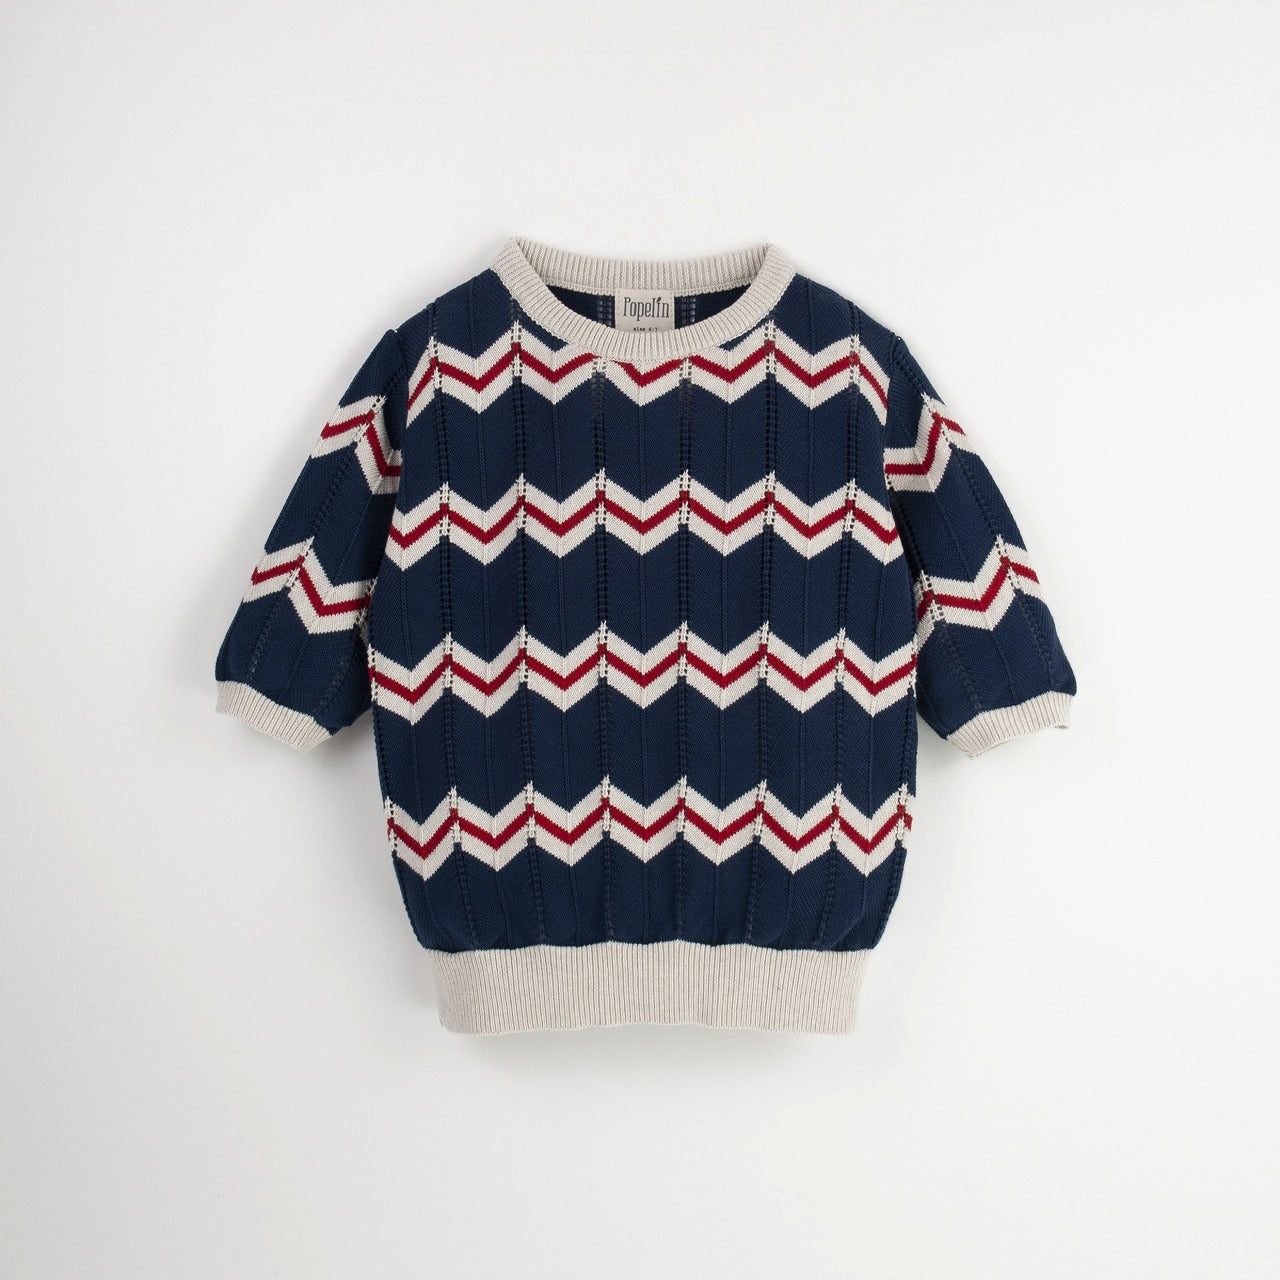 【Popelin】【30%OFF】Navy Blue openwork knit jersey ニットジャージー 12/18m,18/24m  | Coucoubebe/ククベベ